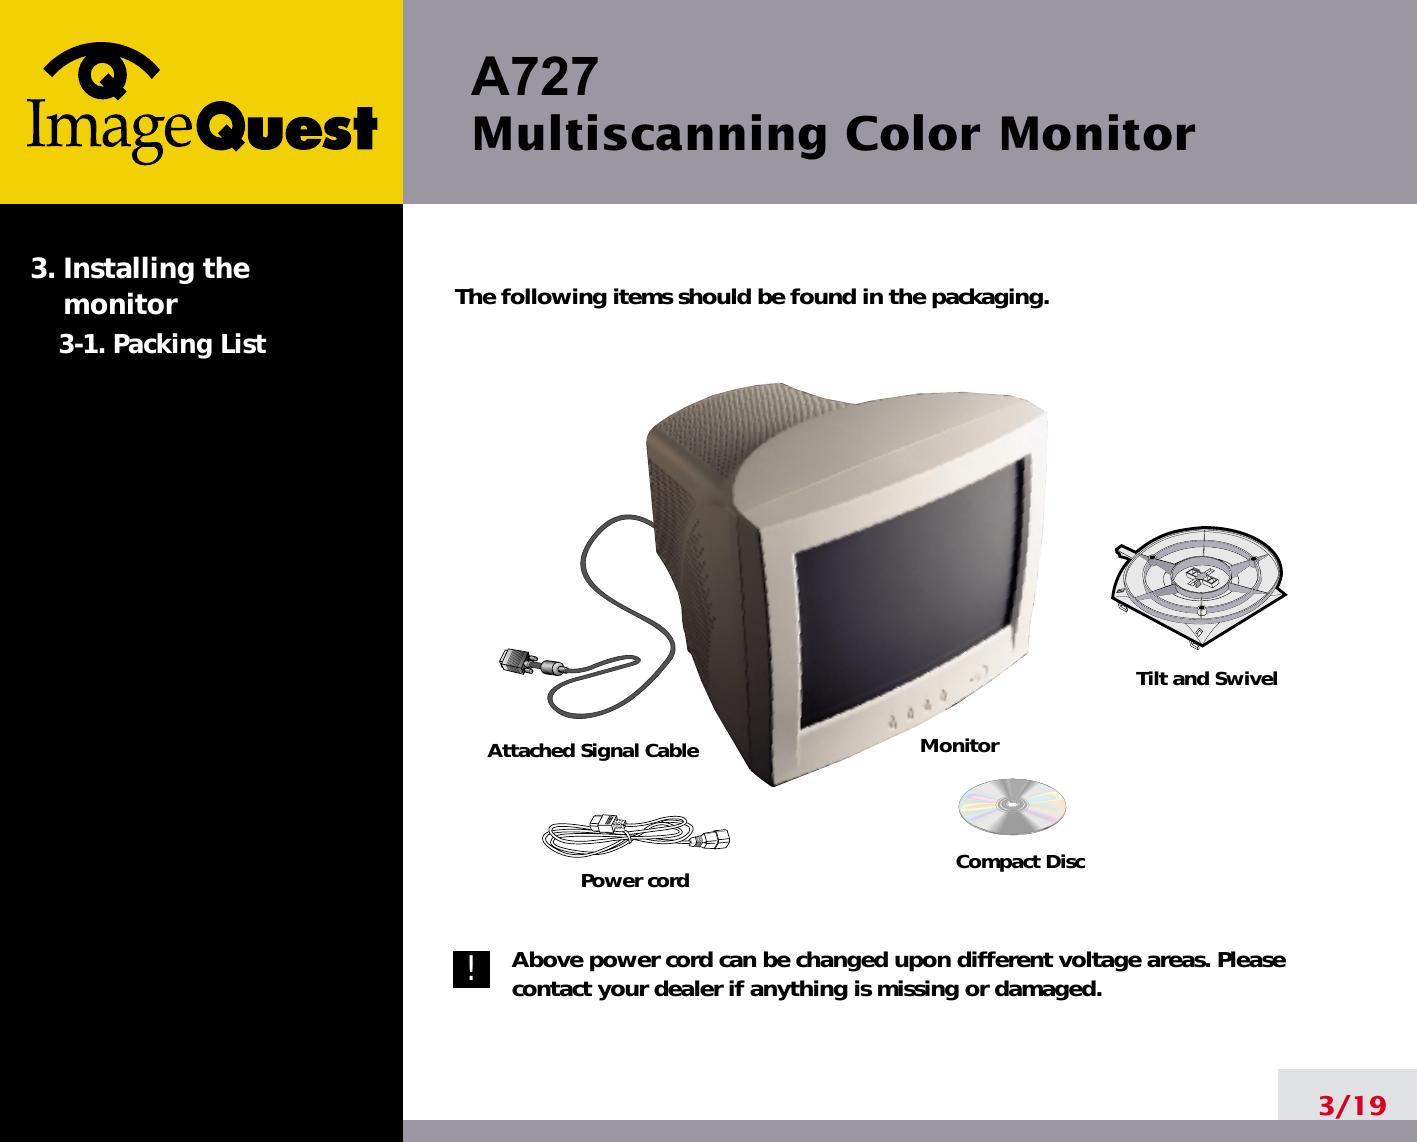 A727 Multiscanning Color Monitor3/19The following items should be found in the packaging.Above power cord can be changed upon different voltage areas. Pleasecontact your dealer if anything is missing or damaged.3. Installing the monitor3-1. Packing ListTilt and SwivelCompact DiscPower cordMonitorAttached Signal Cable!